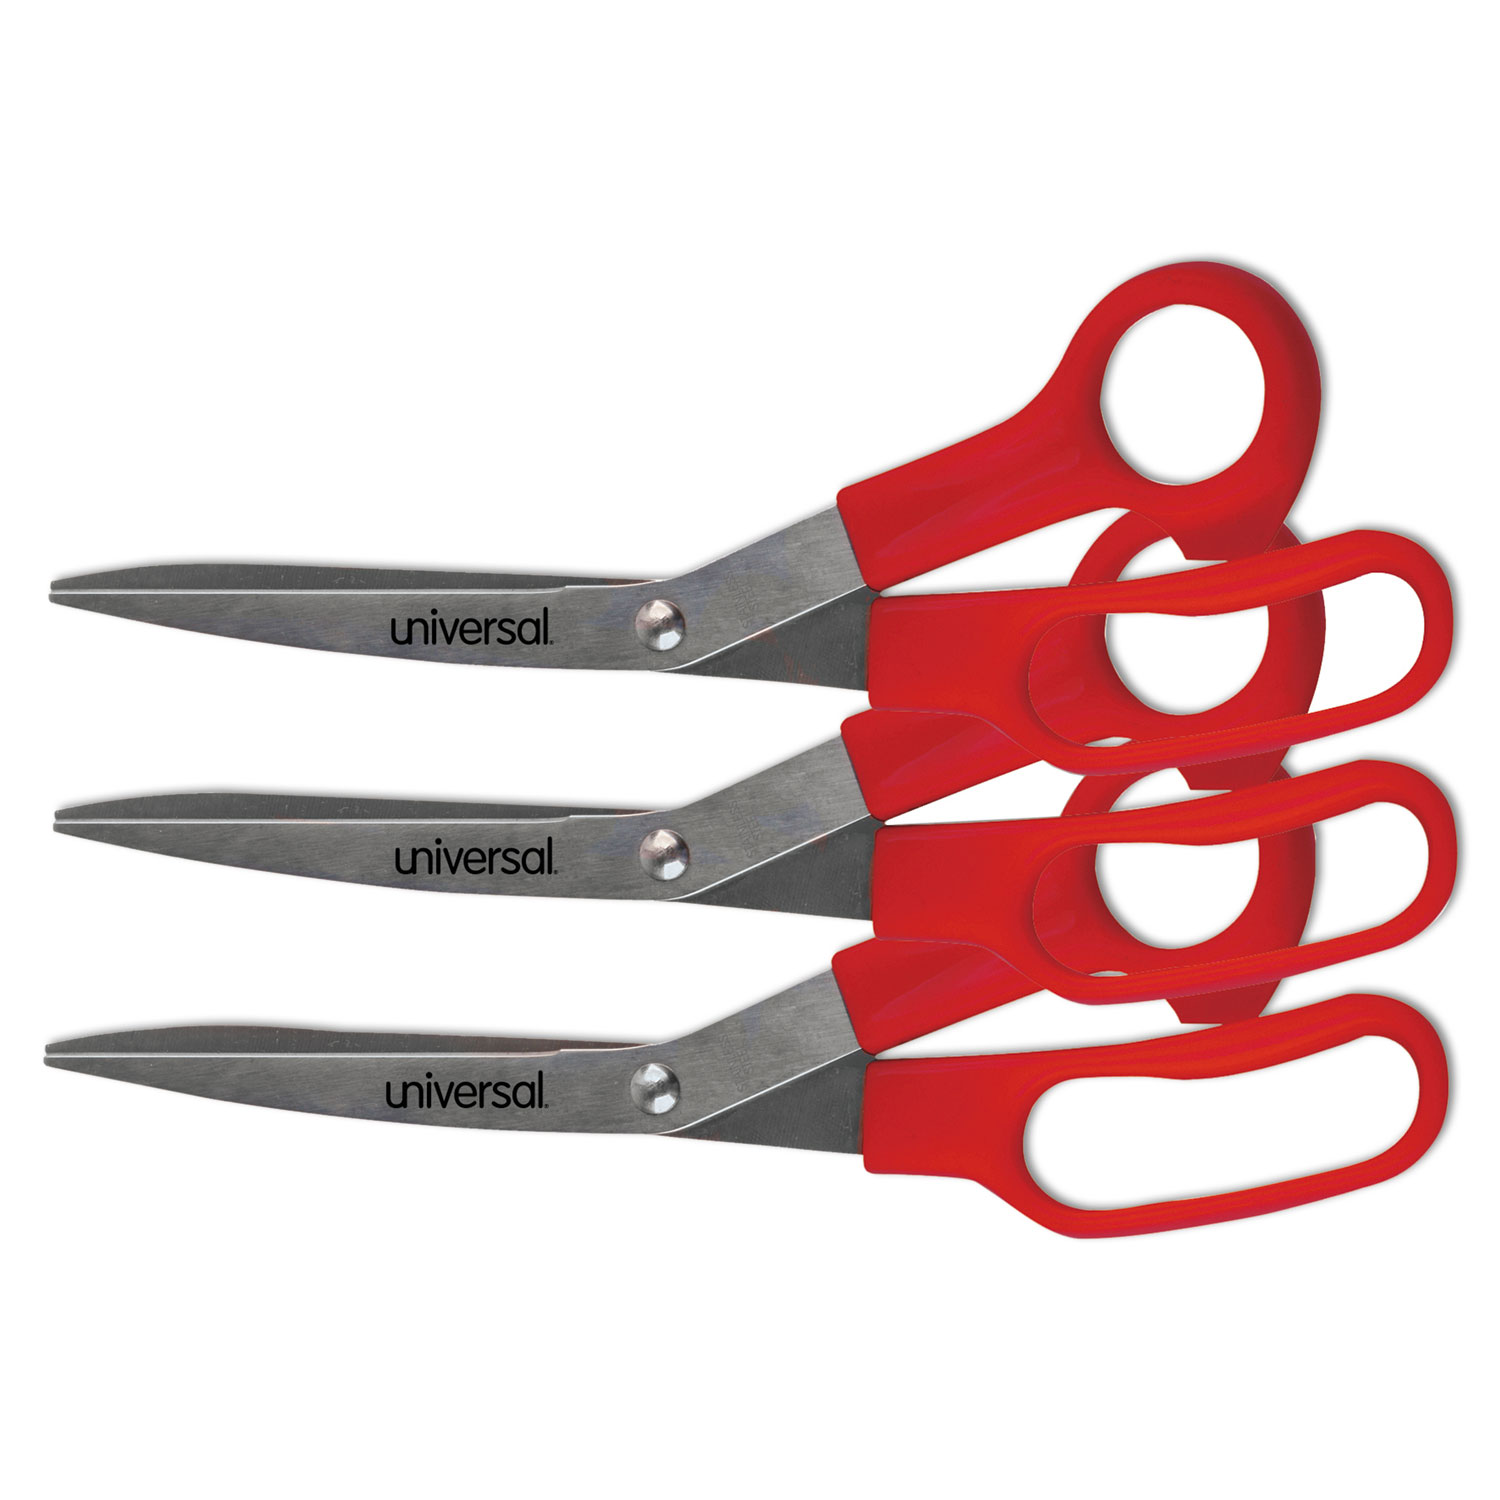  Universal UNV92019 General Purpose Stainless Steel Scissors, 7.75 Long, 3 Cut Length, Red Offset Handles, 3/Pack (UNV92019) 